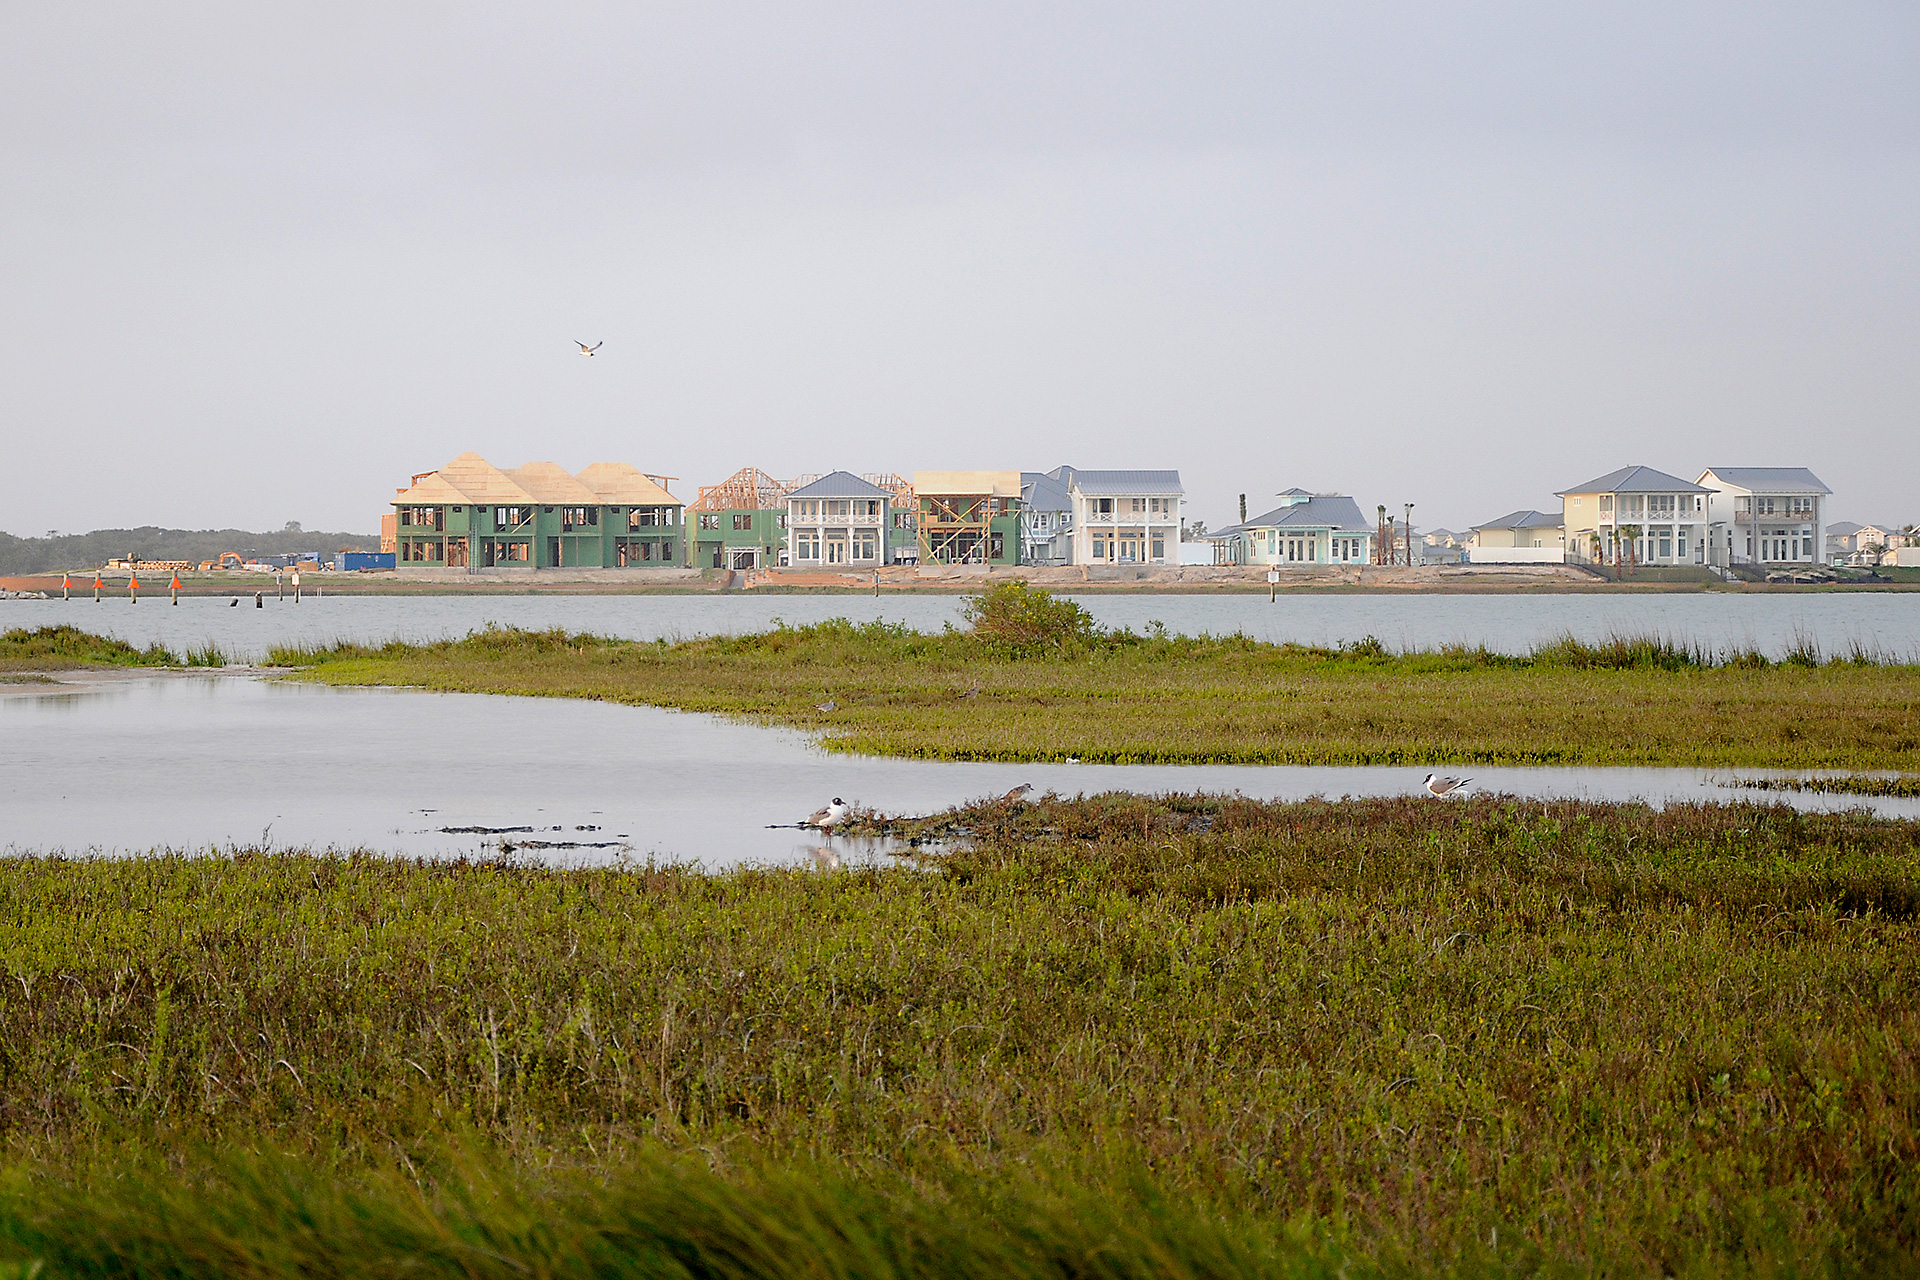 Prairie wetland with birds in the foreground and new construction in the distance